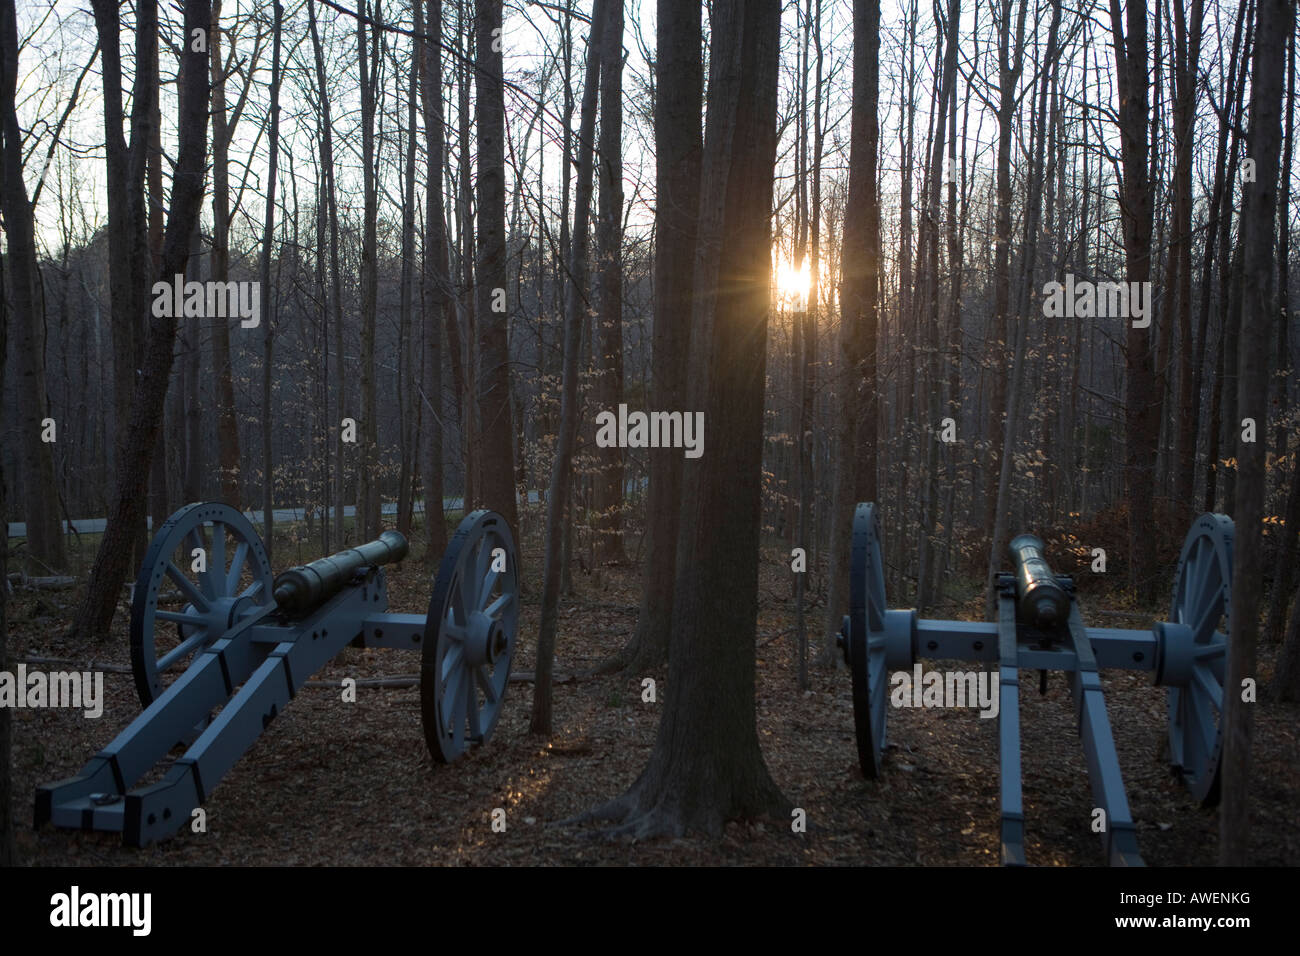 Revolutionary War artillery cannons sit in the woods of Guilford Courthouse National Military Park, near Greensboro, NC Stock Photo